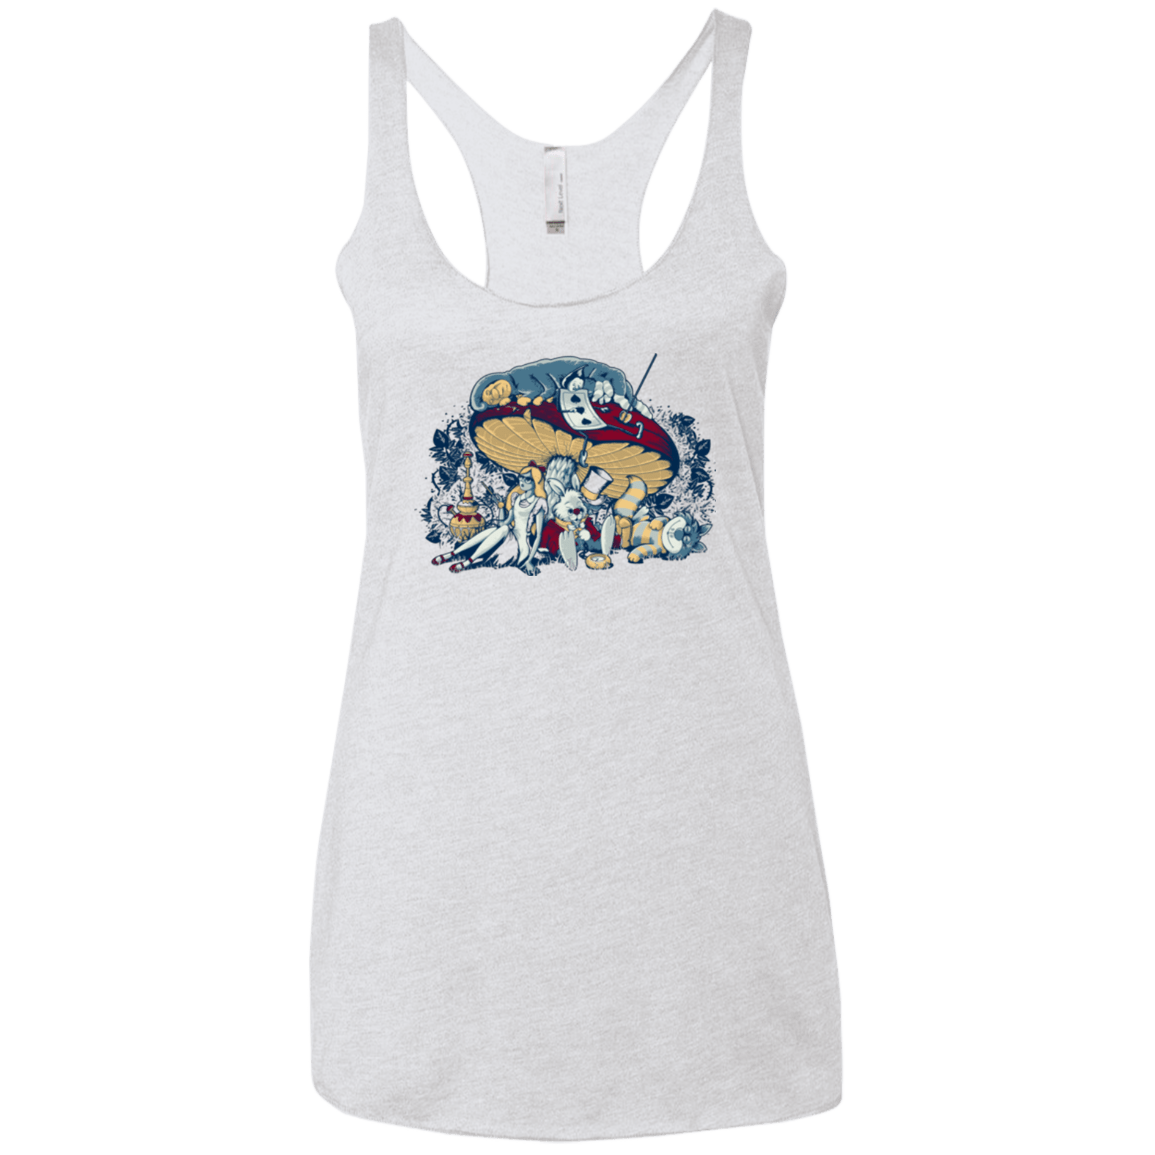 T-Shirts Heather White / X-Small STONED IN WONDERLAND Women's Triblend Racerback Tank